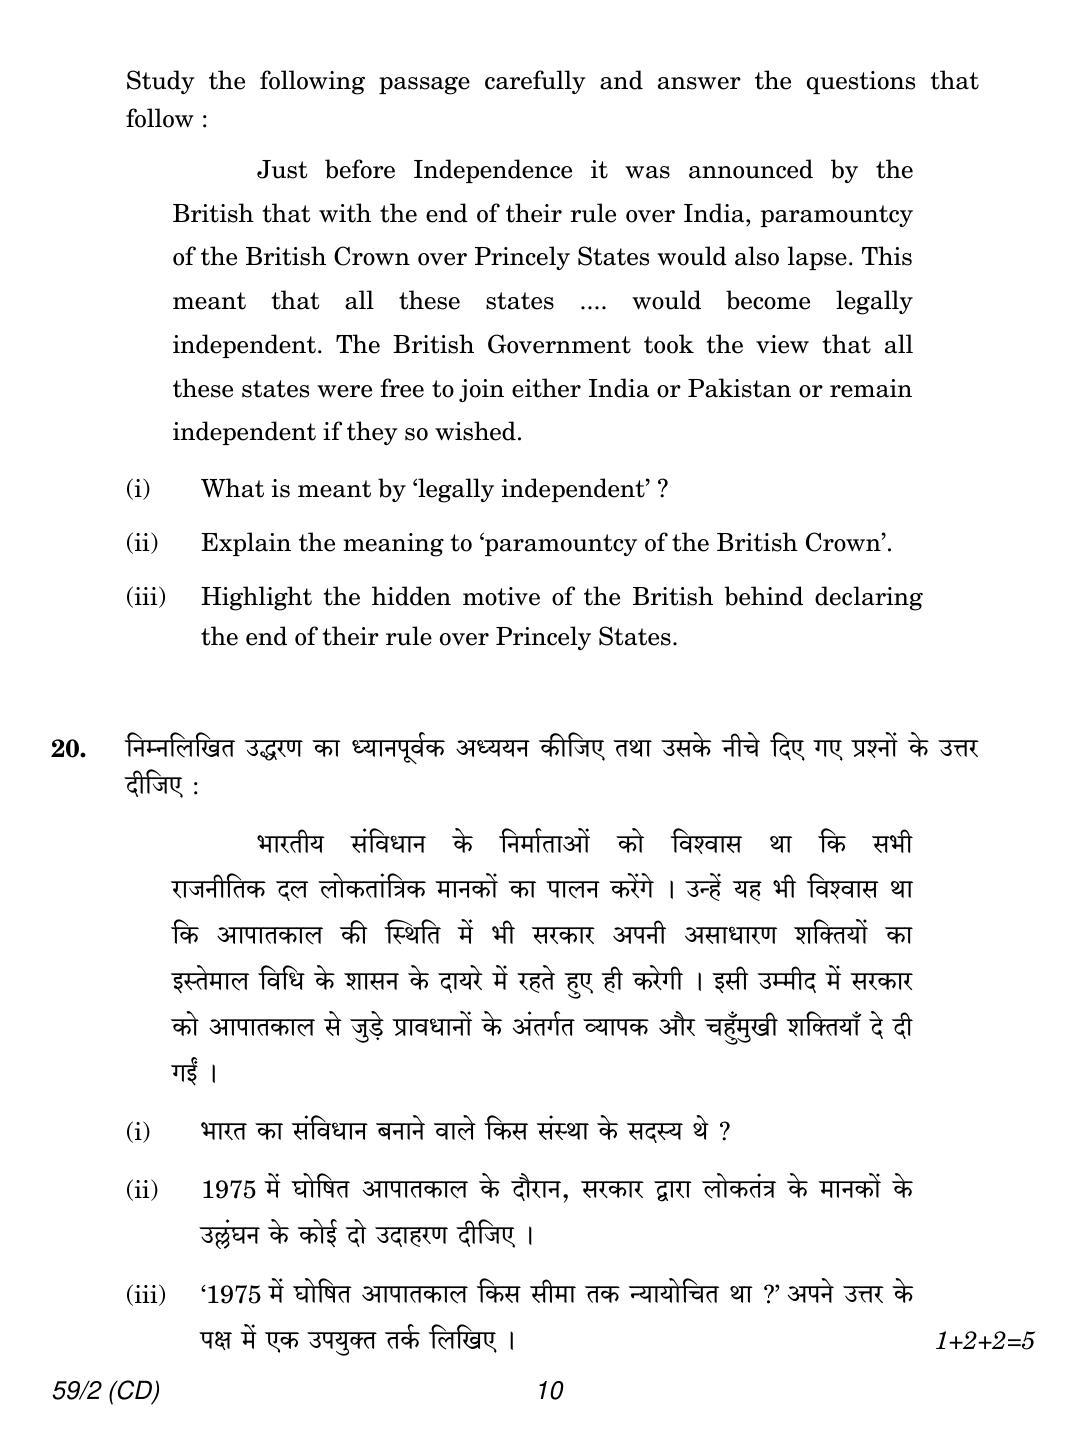 CBSE Class 12 59-2 POLITICAL SCIENCE CD 2018 Question Paper - Page 10